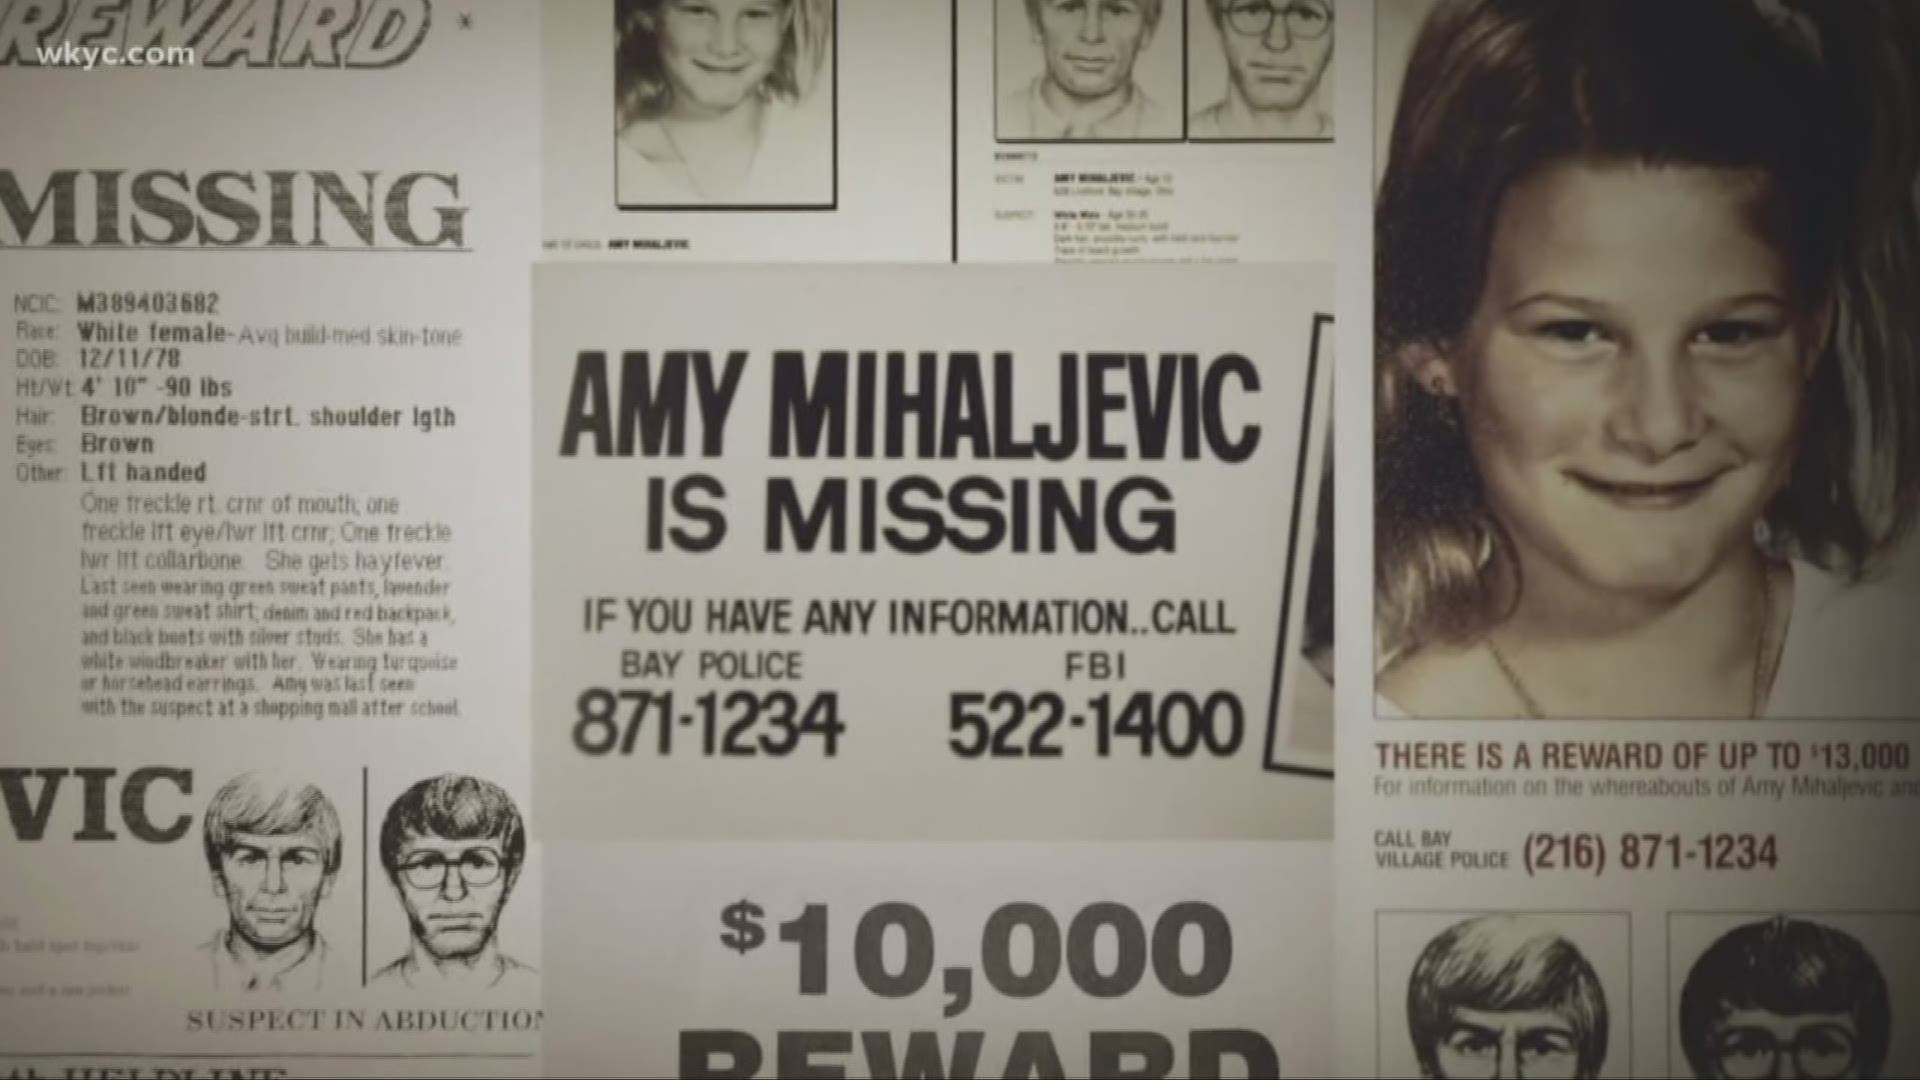 Sunday will mark 30 years since Amy Mihaljevic died. Although her case remains cold, the FBI is making a new effort to find tips.